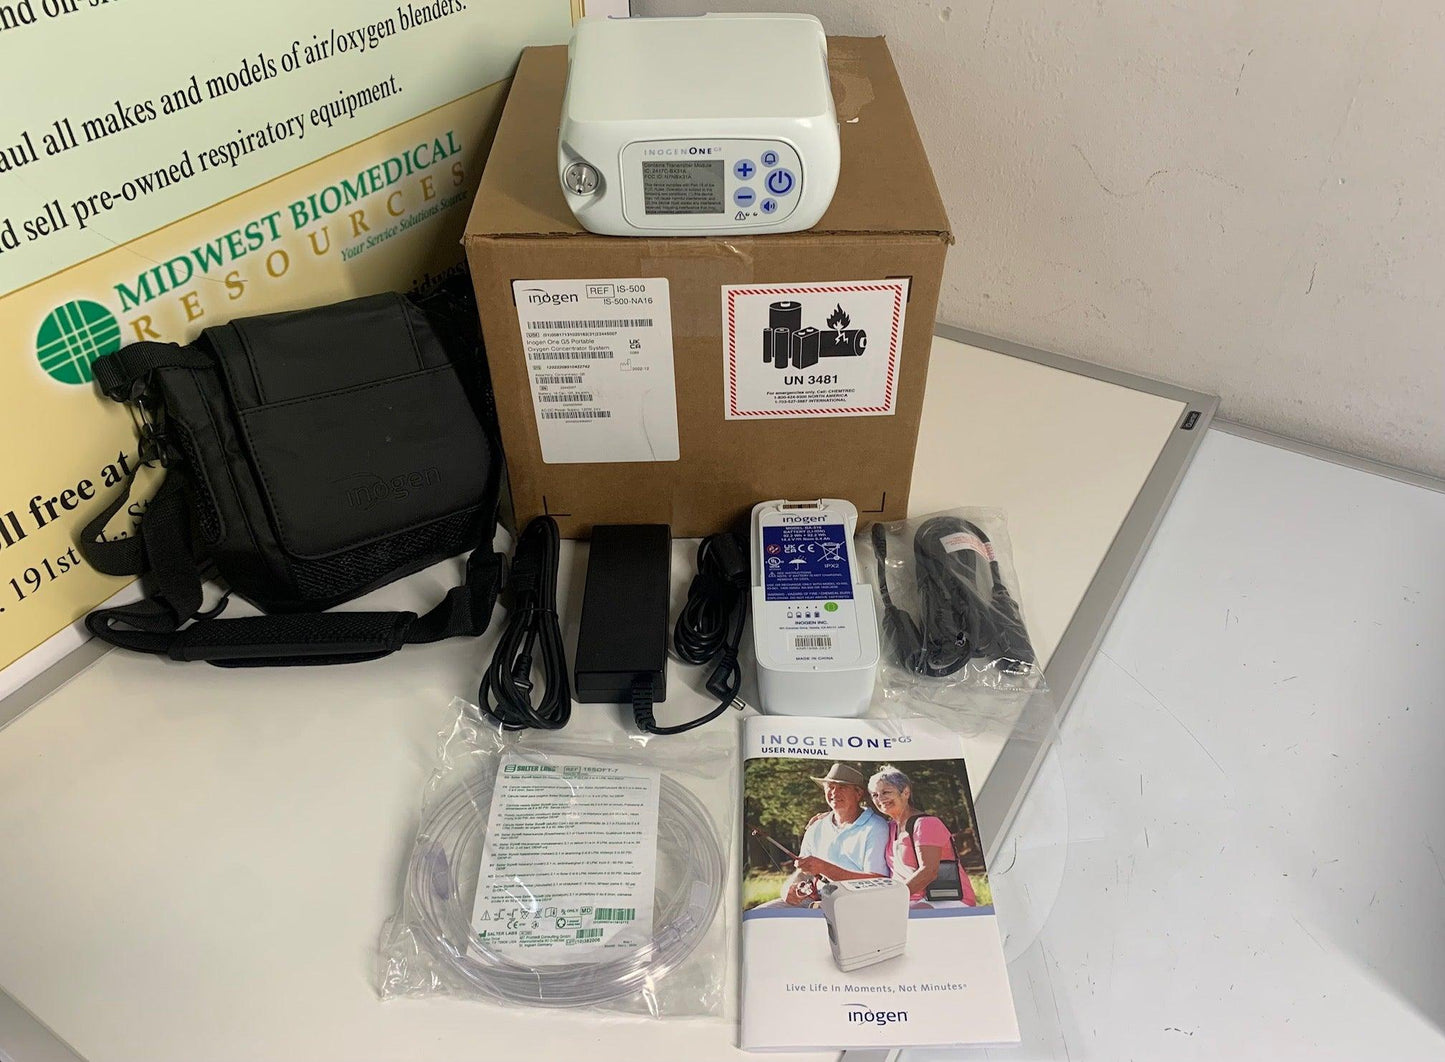 NEW Inogen One G5 Portable Oxygen Concentrator System Model IO-500 IS-500 , IS-500-NA16